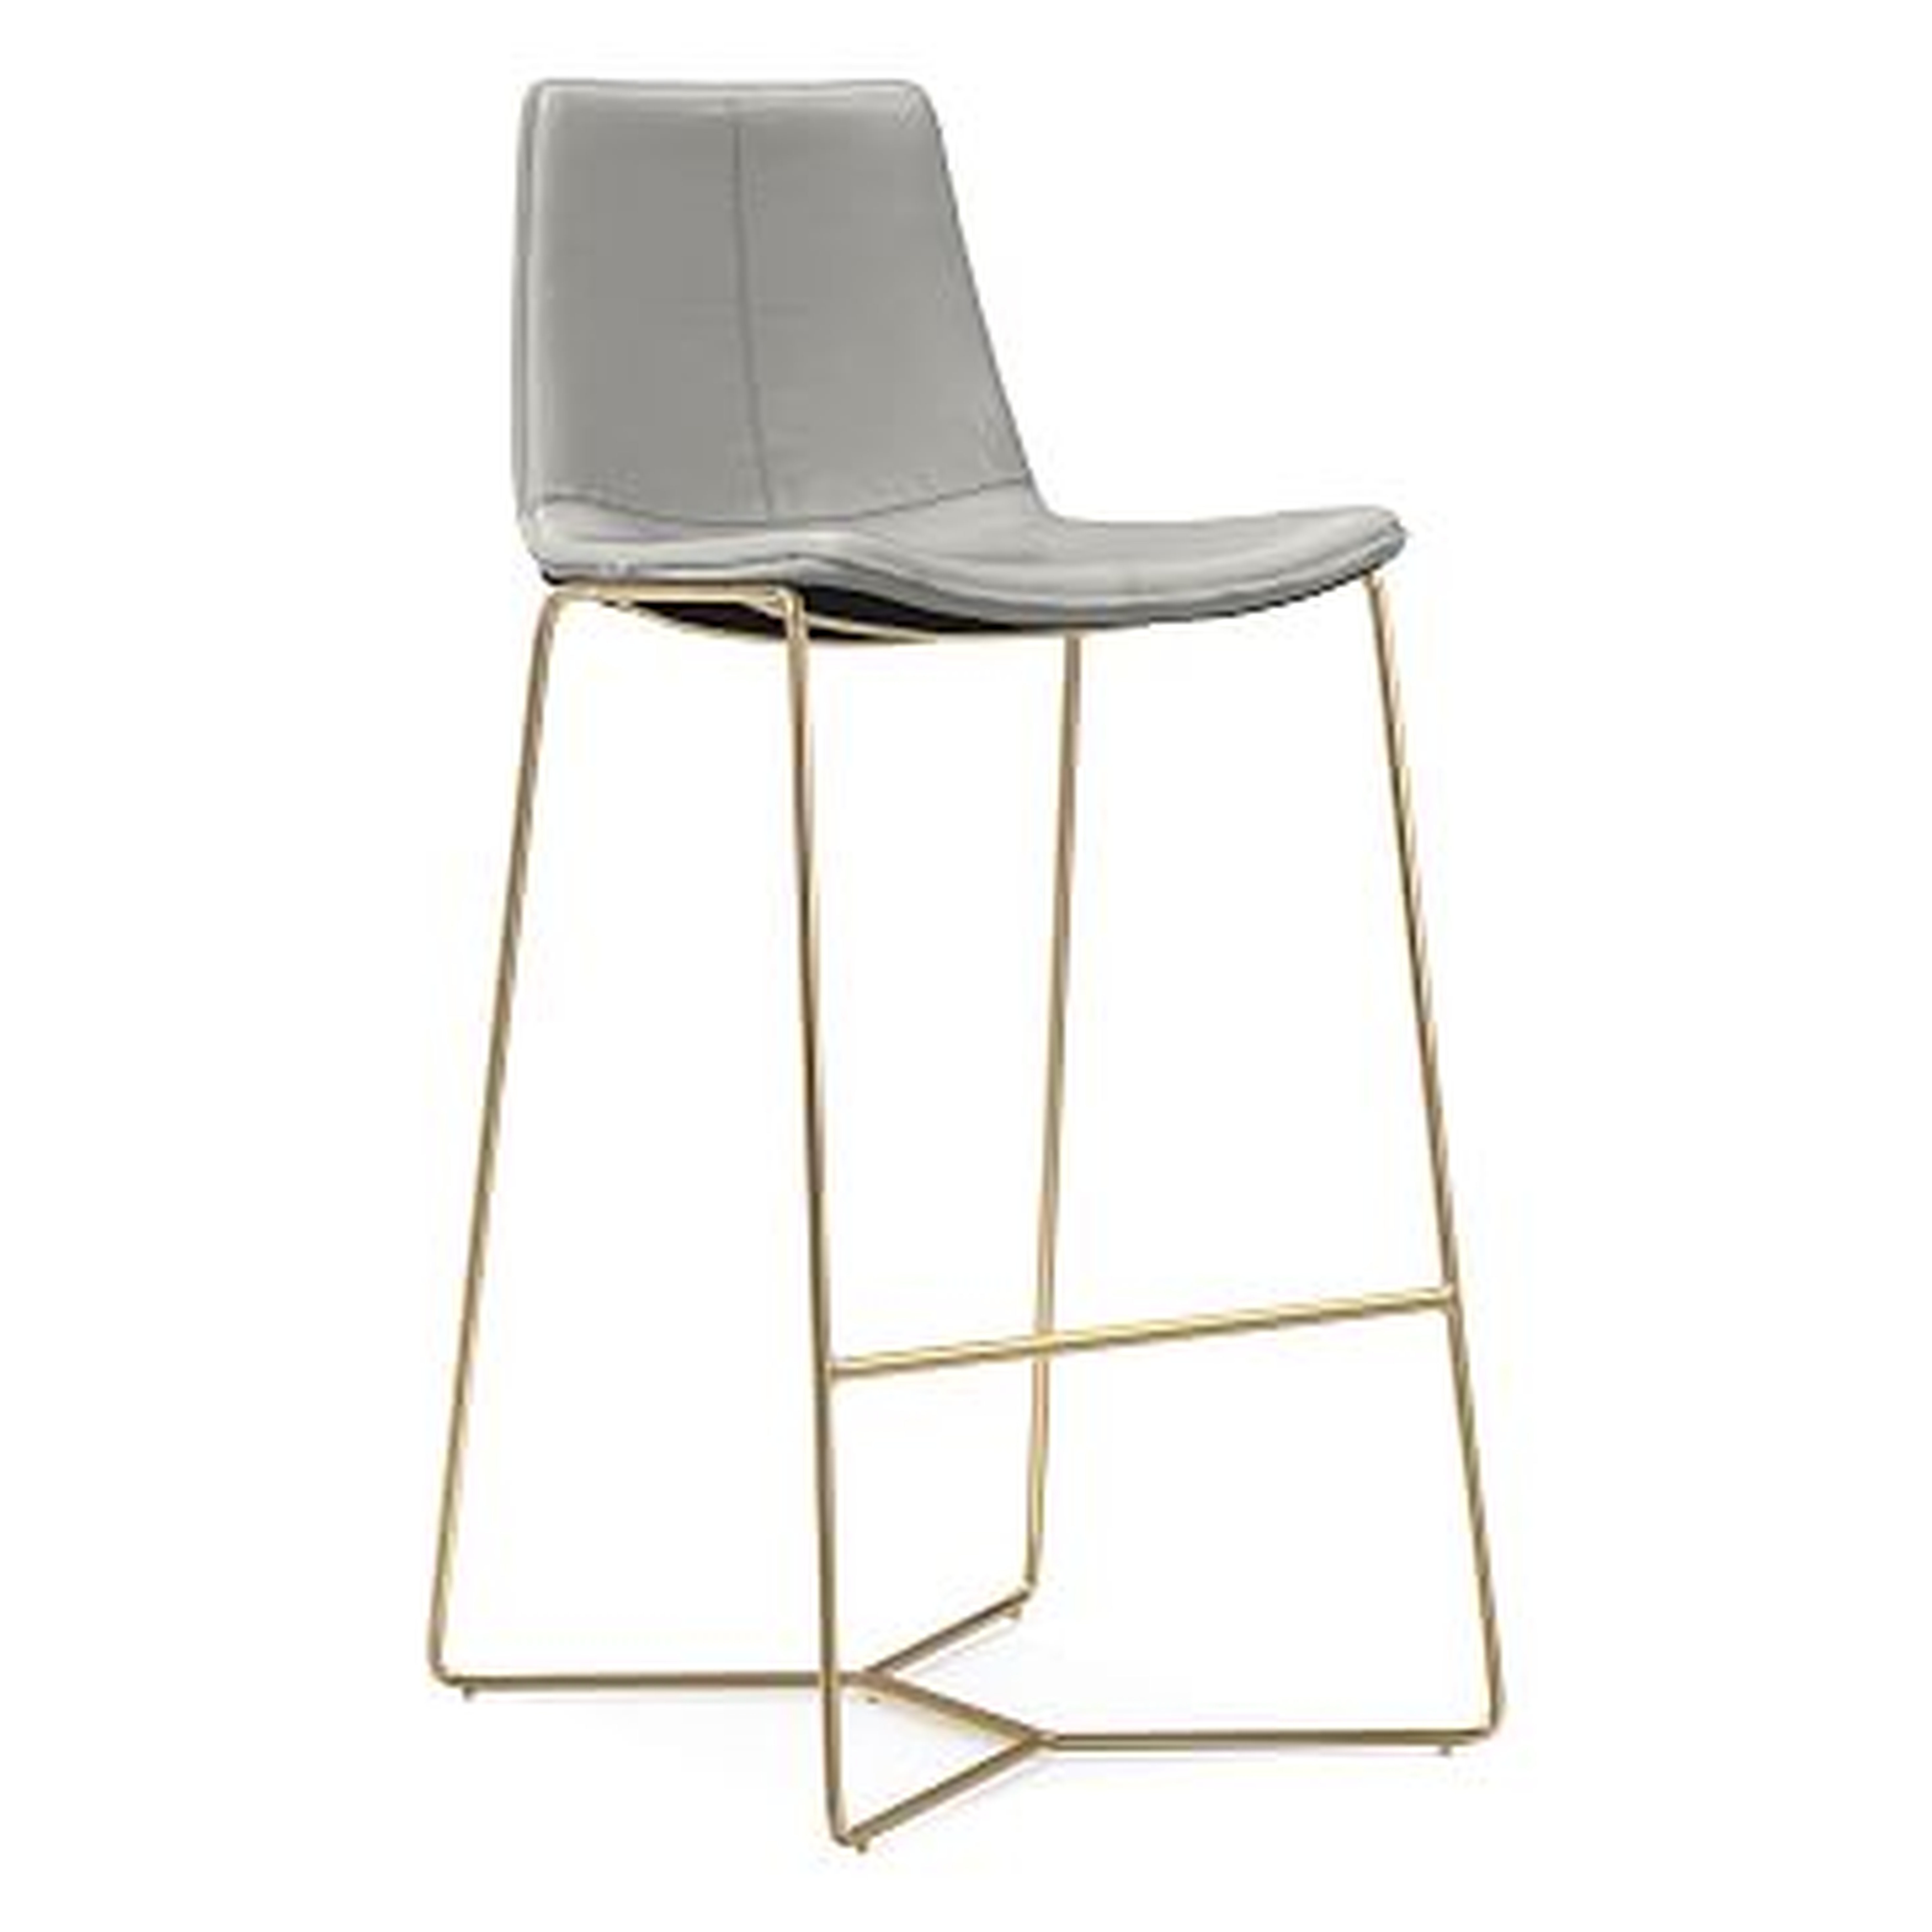 Slope Bar Stool, Leather, Cement, Antique Brass - West Elm